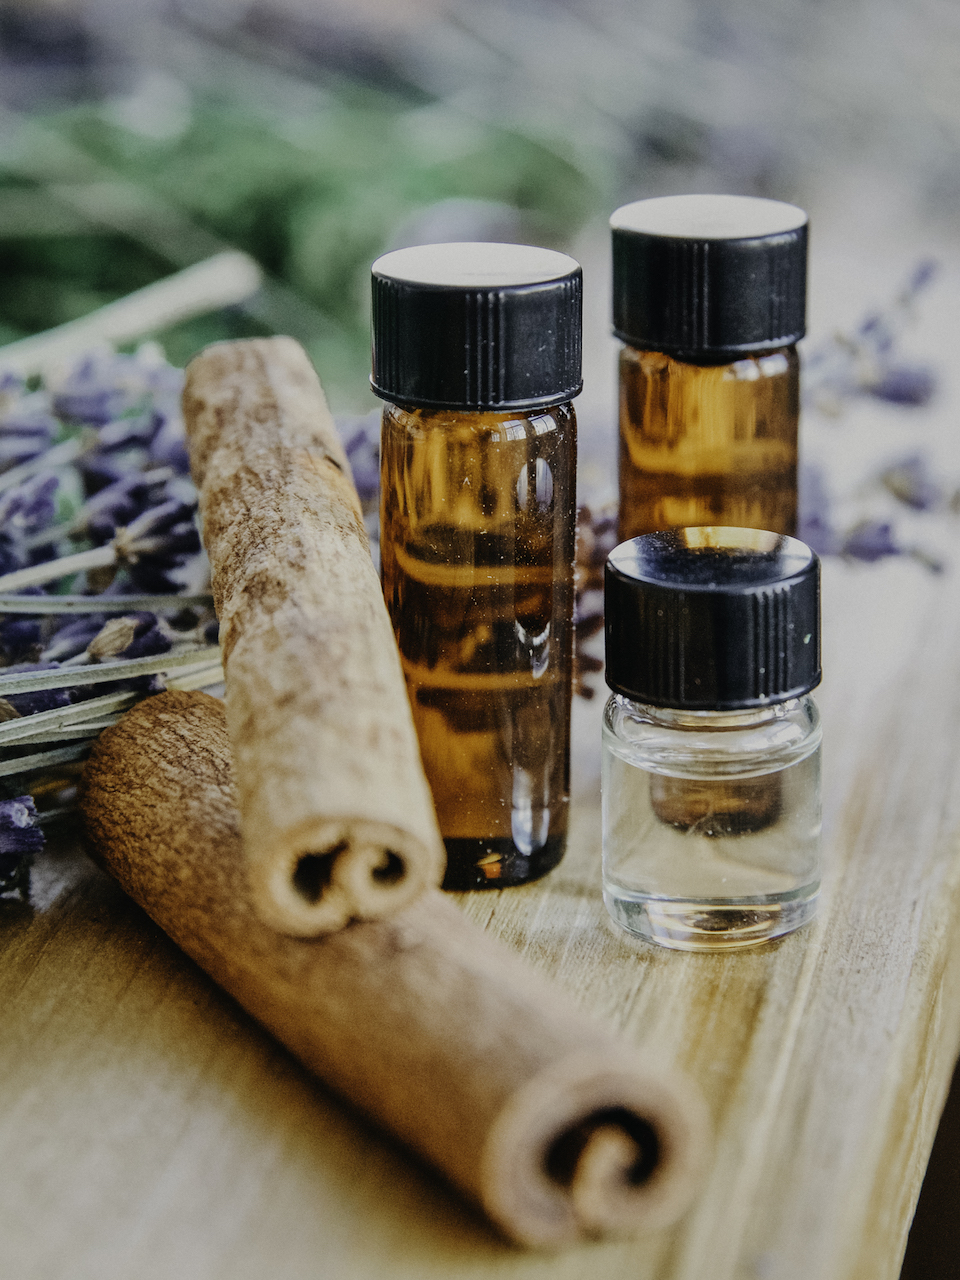 Online Natural Perfumery Course by Herbal Academy – learn how to make botanical perfumes